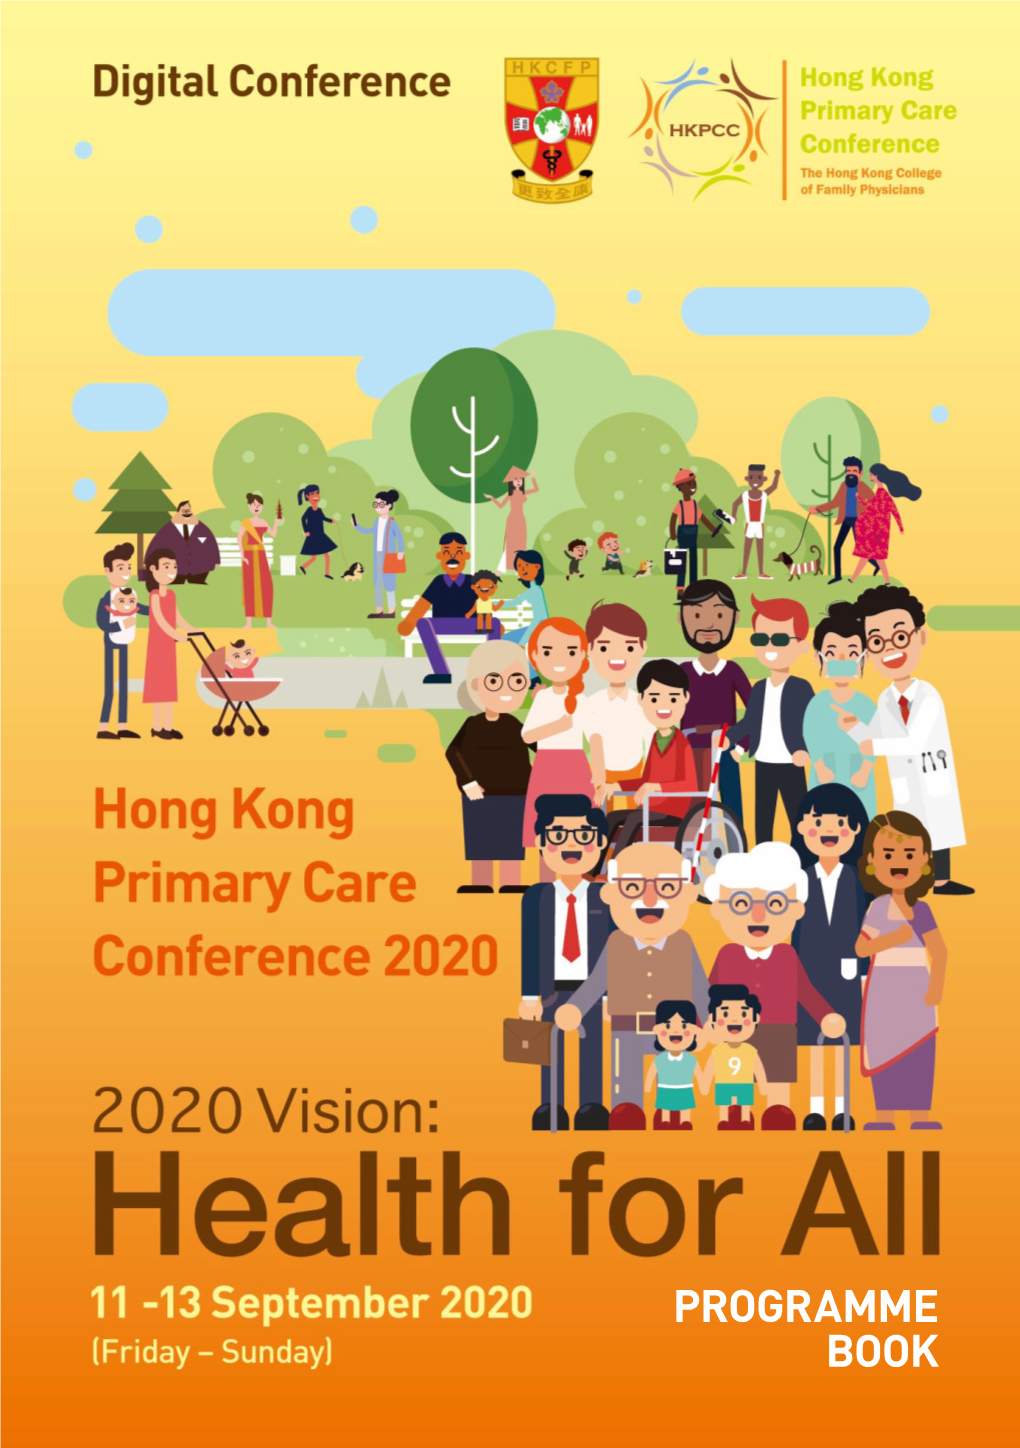 PROGRAMME BOOK Hong Kong Primary Care Conference 2020 “2020 Vision: Health for All”